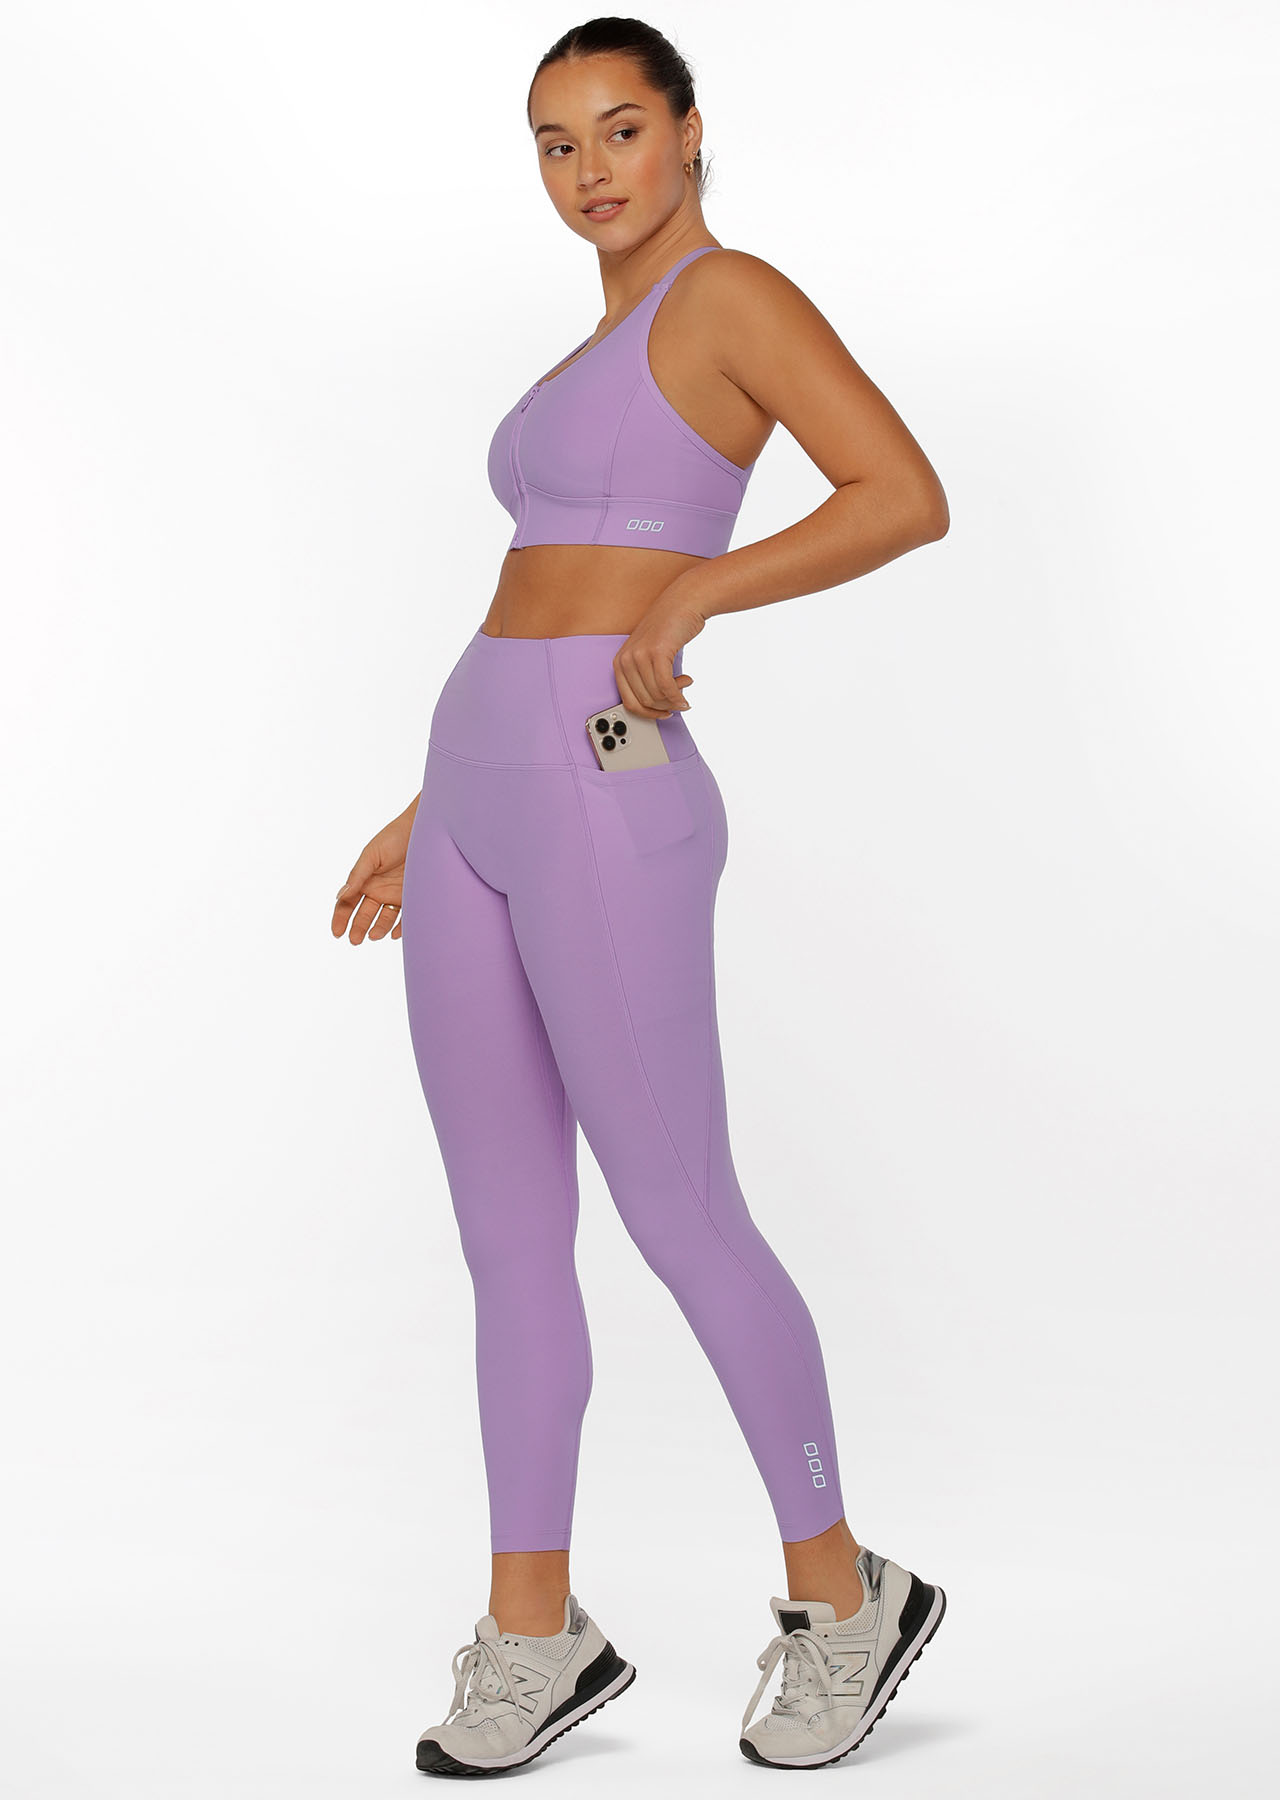 Model wearing lilac coloured sports bra and leggings with phone pockets